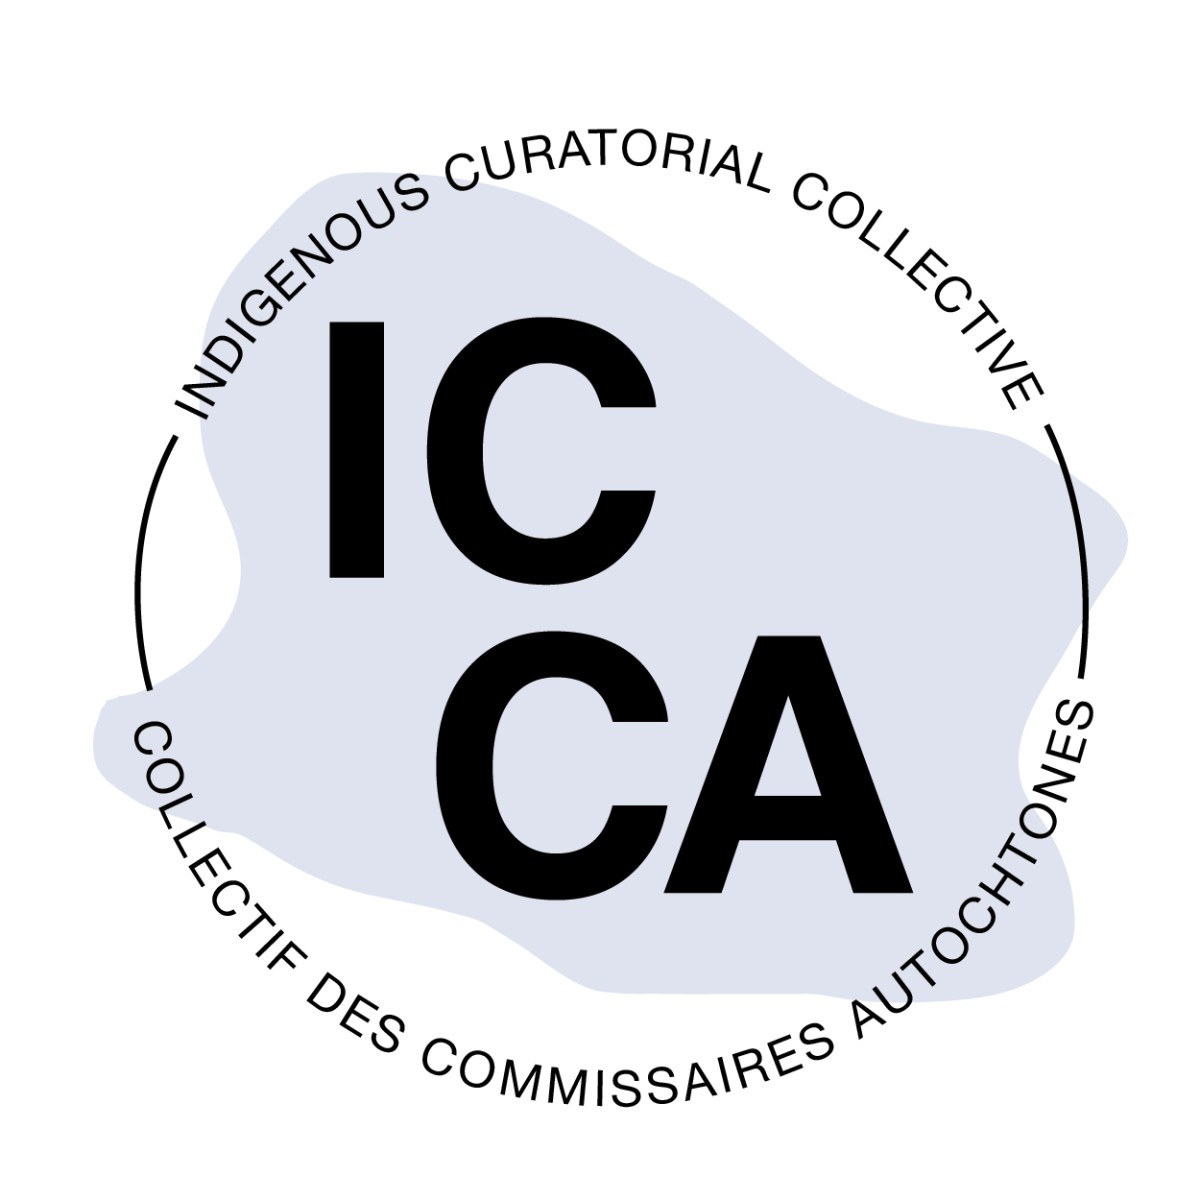 Indigenous Curatorial council 